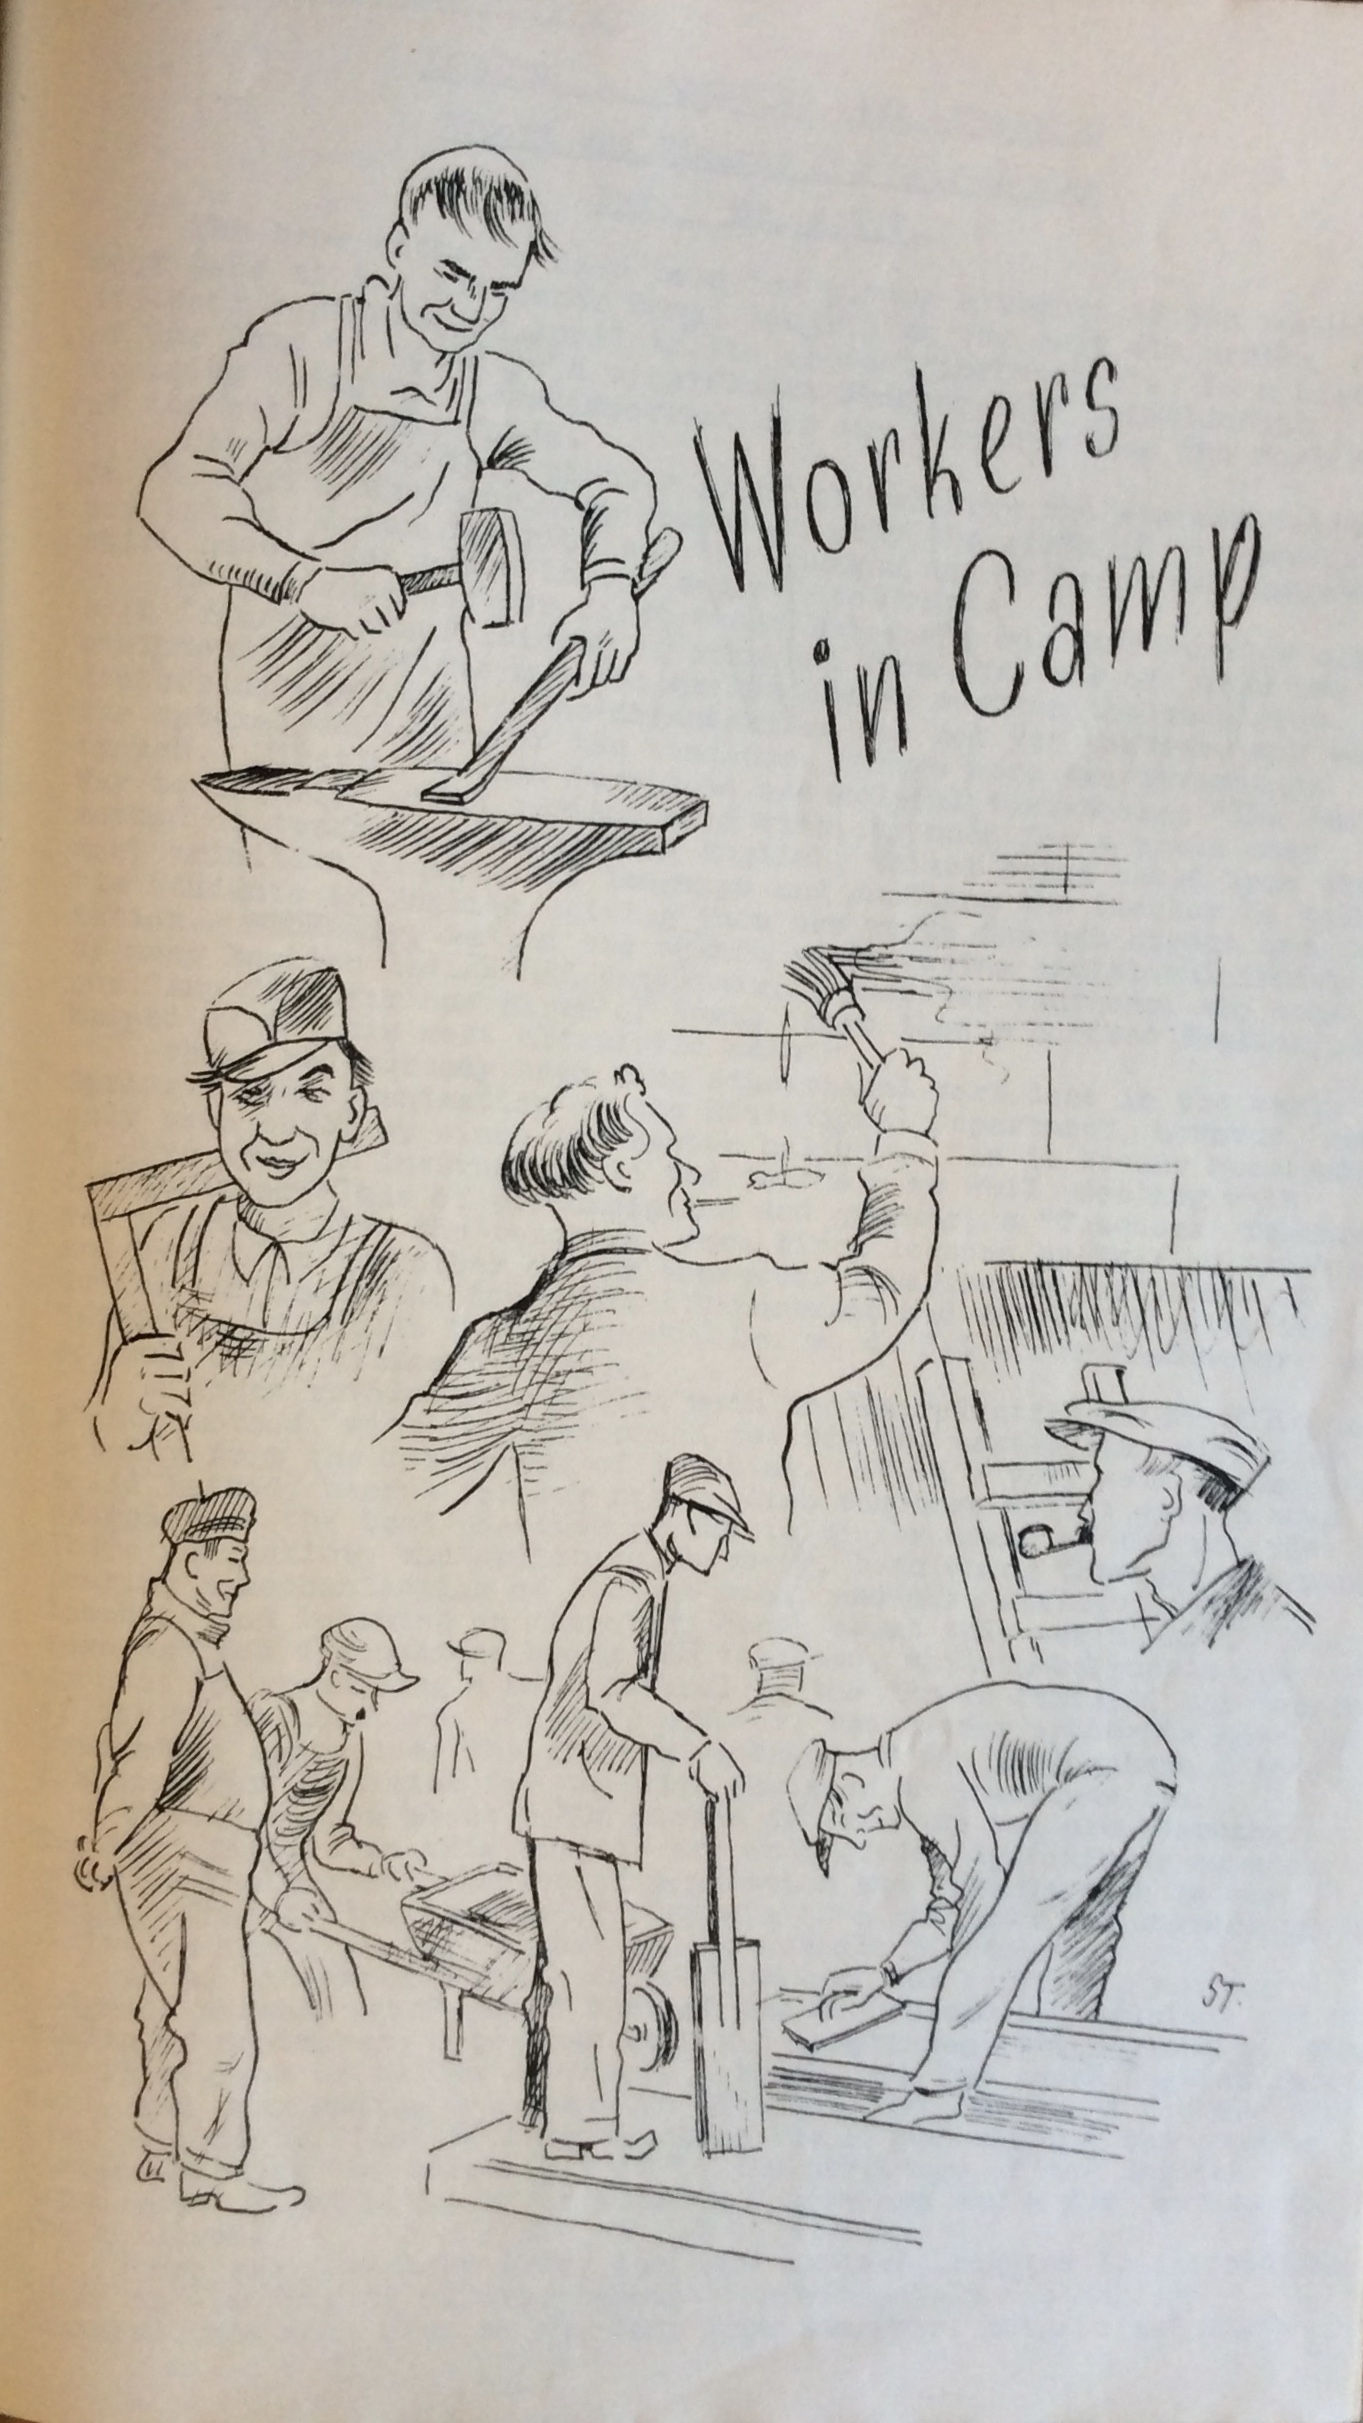 Kitchener Camp Review, October 1939, page 6